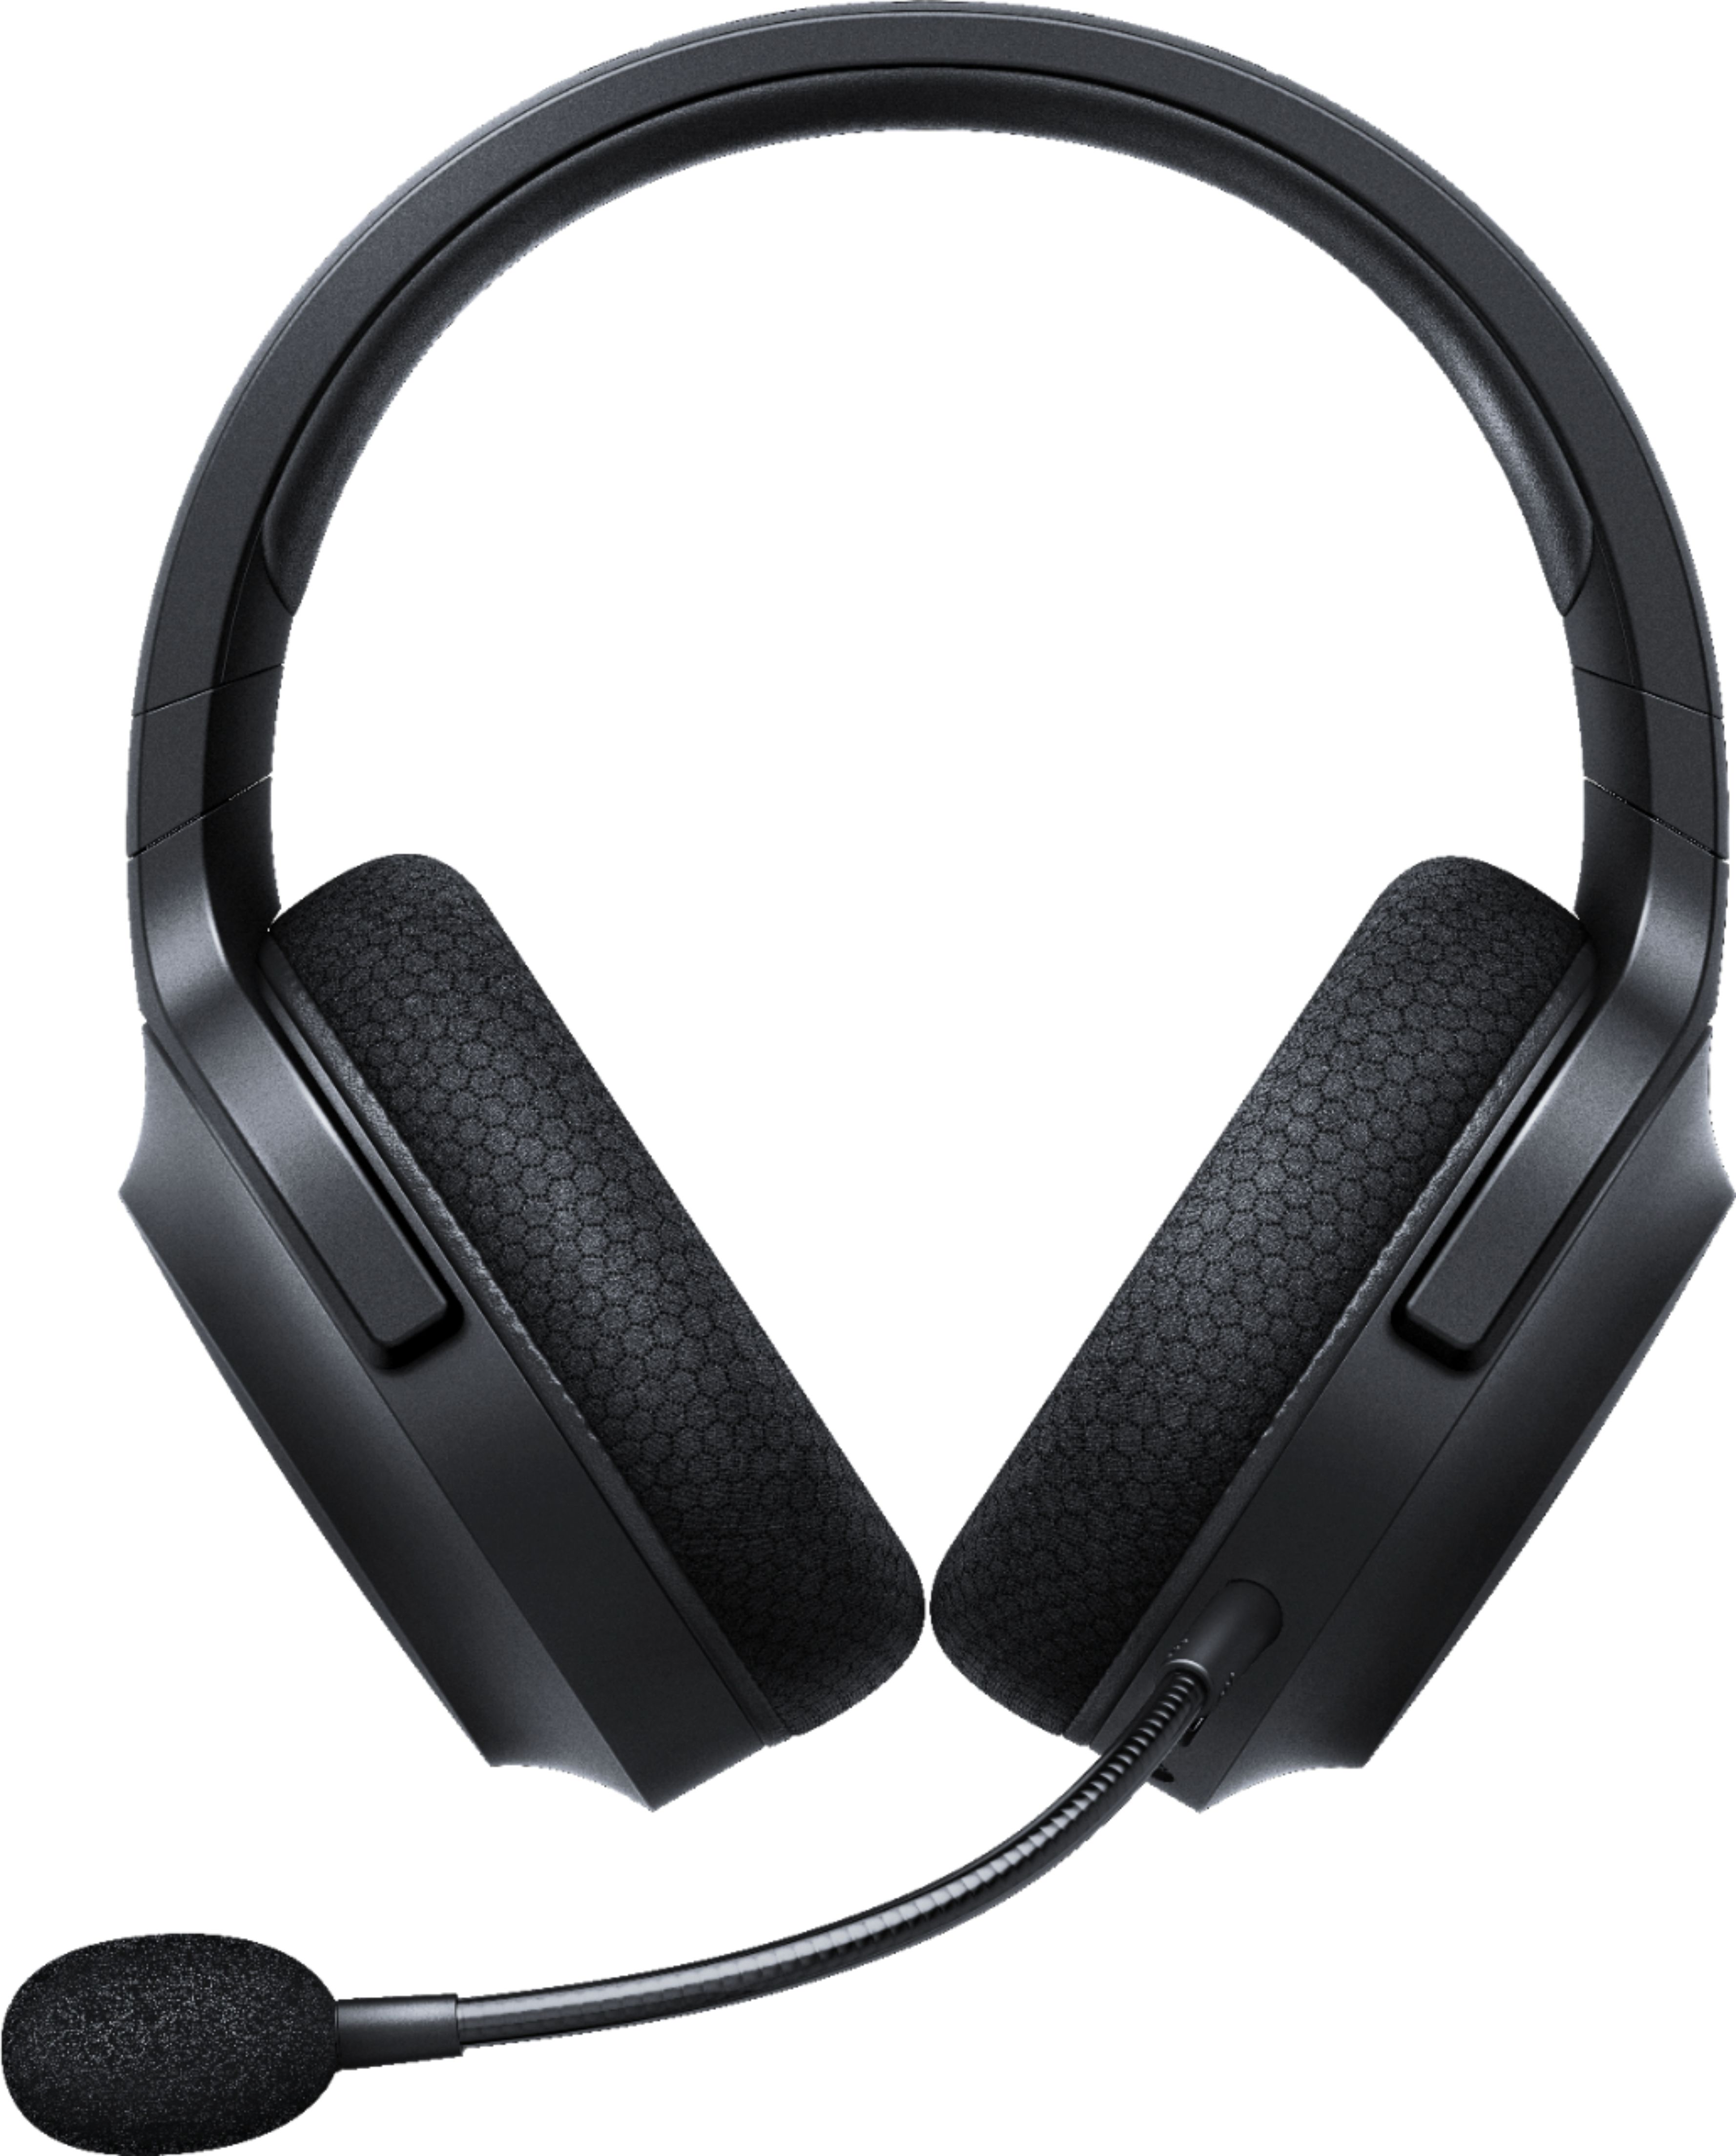  Razer Barracuda X Wireless Gaming & Mobile Headset (PC,  Playstation, Switch, Android, iOS): 2.4GHz Wireless + Bluetooth -  Lightweight - 40mm Drivers - Detachable Mic - 50 Hr Battery - Black : Video  Games